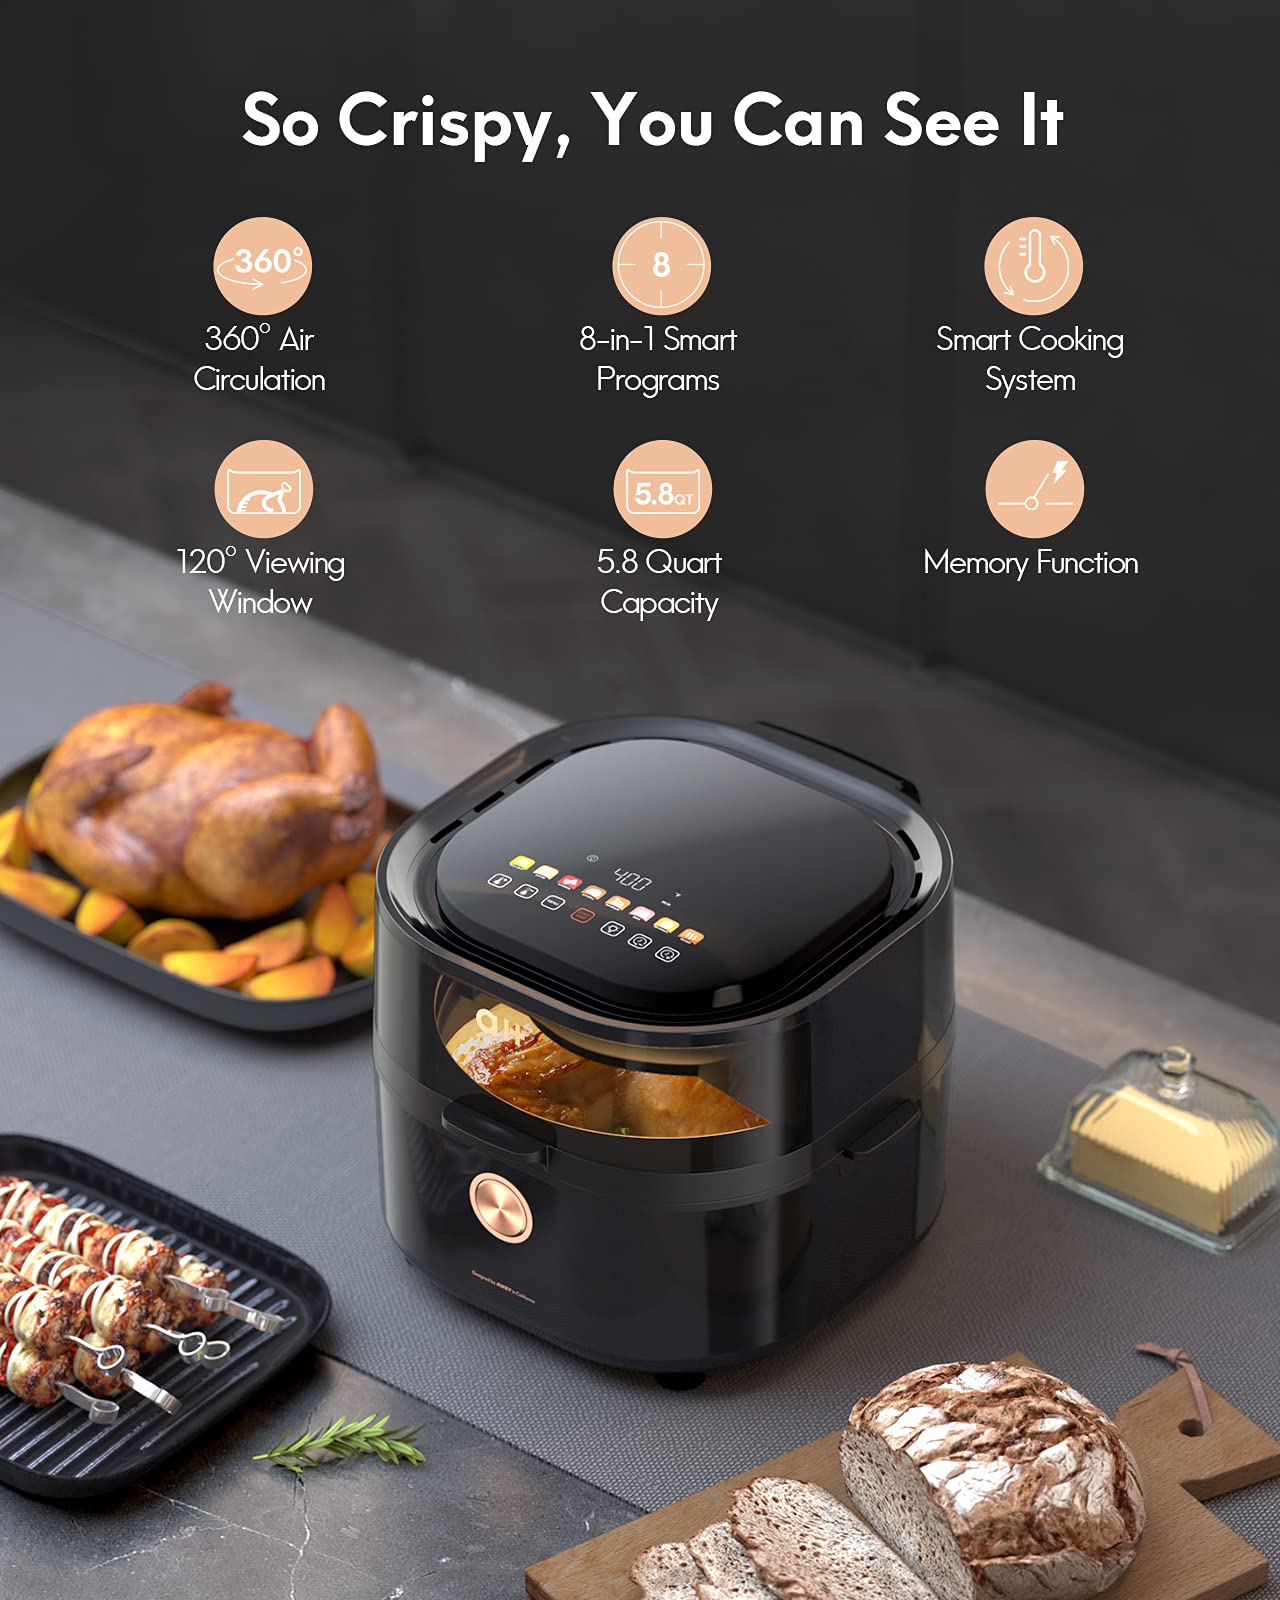 Load image into Gallery viewer, 5.8QT Air Fryer with Viewing Window, Large Capacity Oilless Air Fryer Oven with 100 Digital Cookbook, One Touch Screen for 8 Presets, Nonstick Basket, Dishwasher Safe and a Stainless Finish
